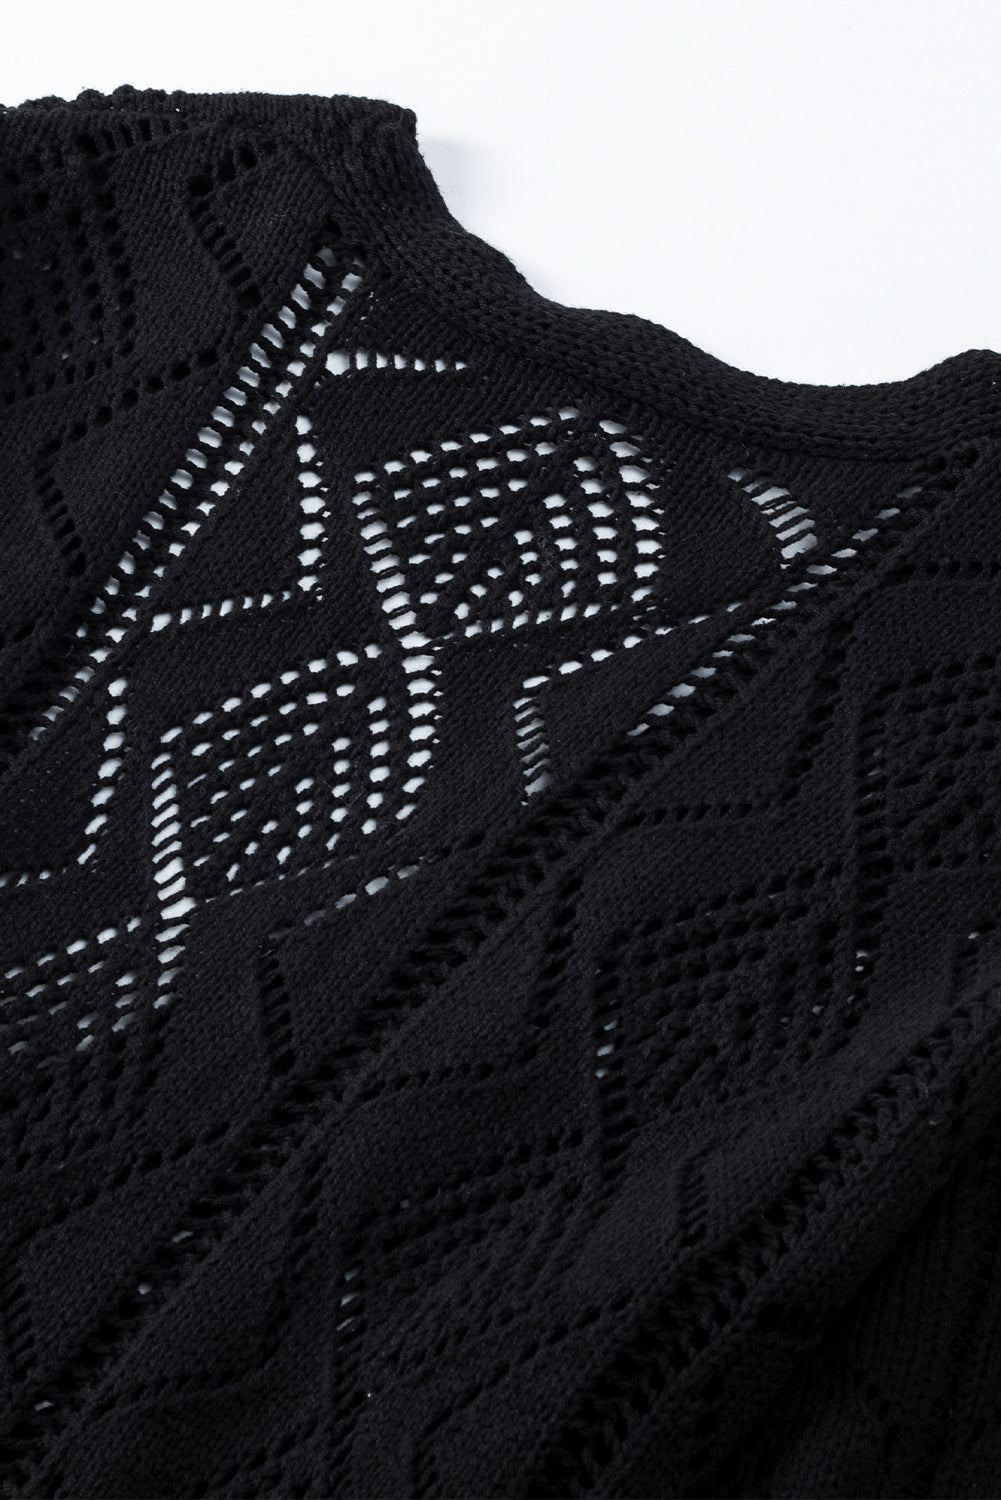 Black Hollow-out Openwork Knit Cardigan